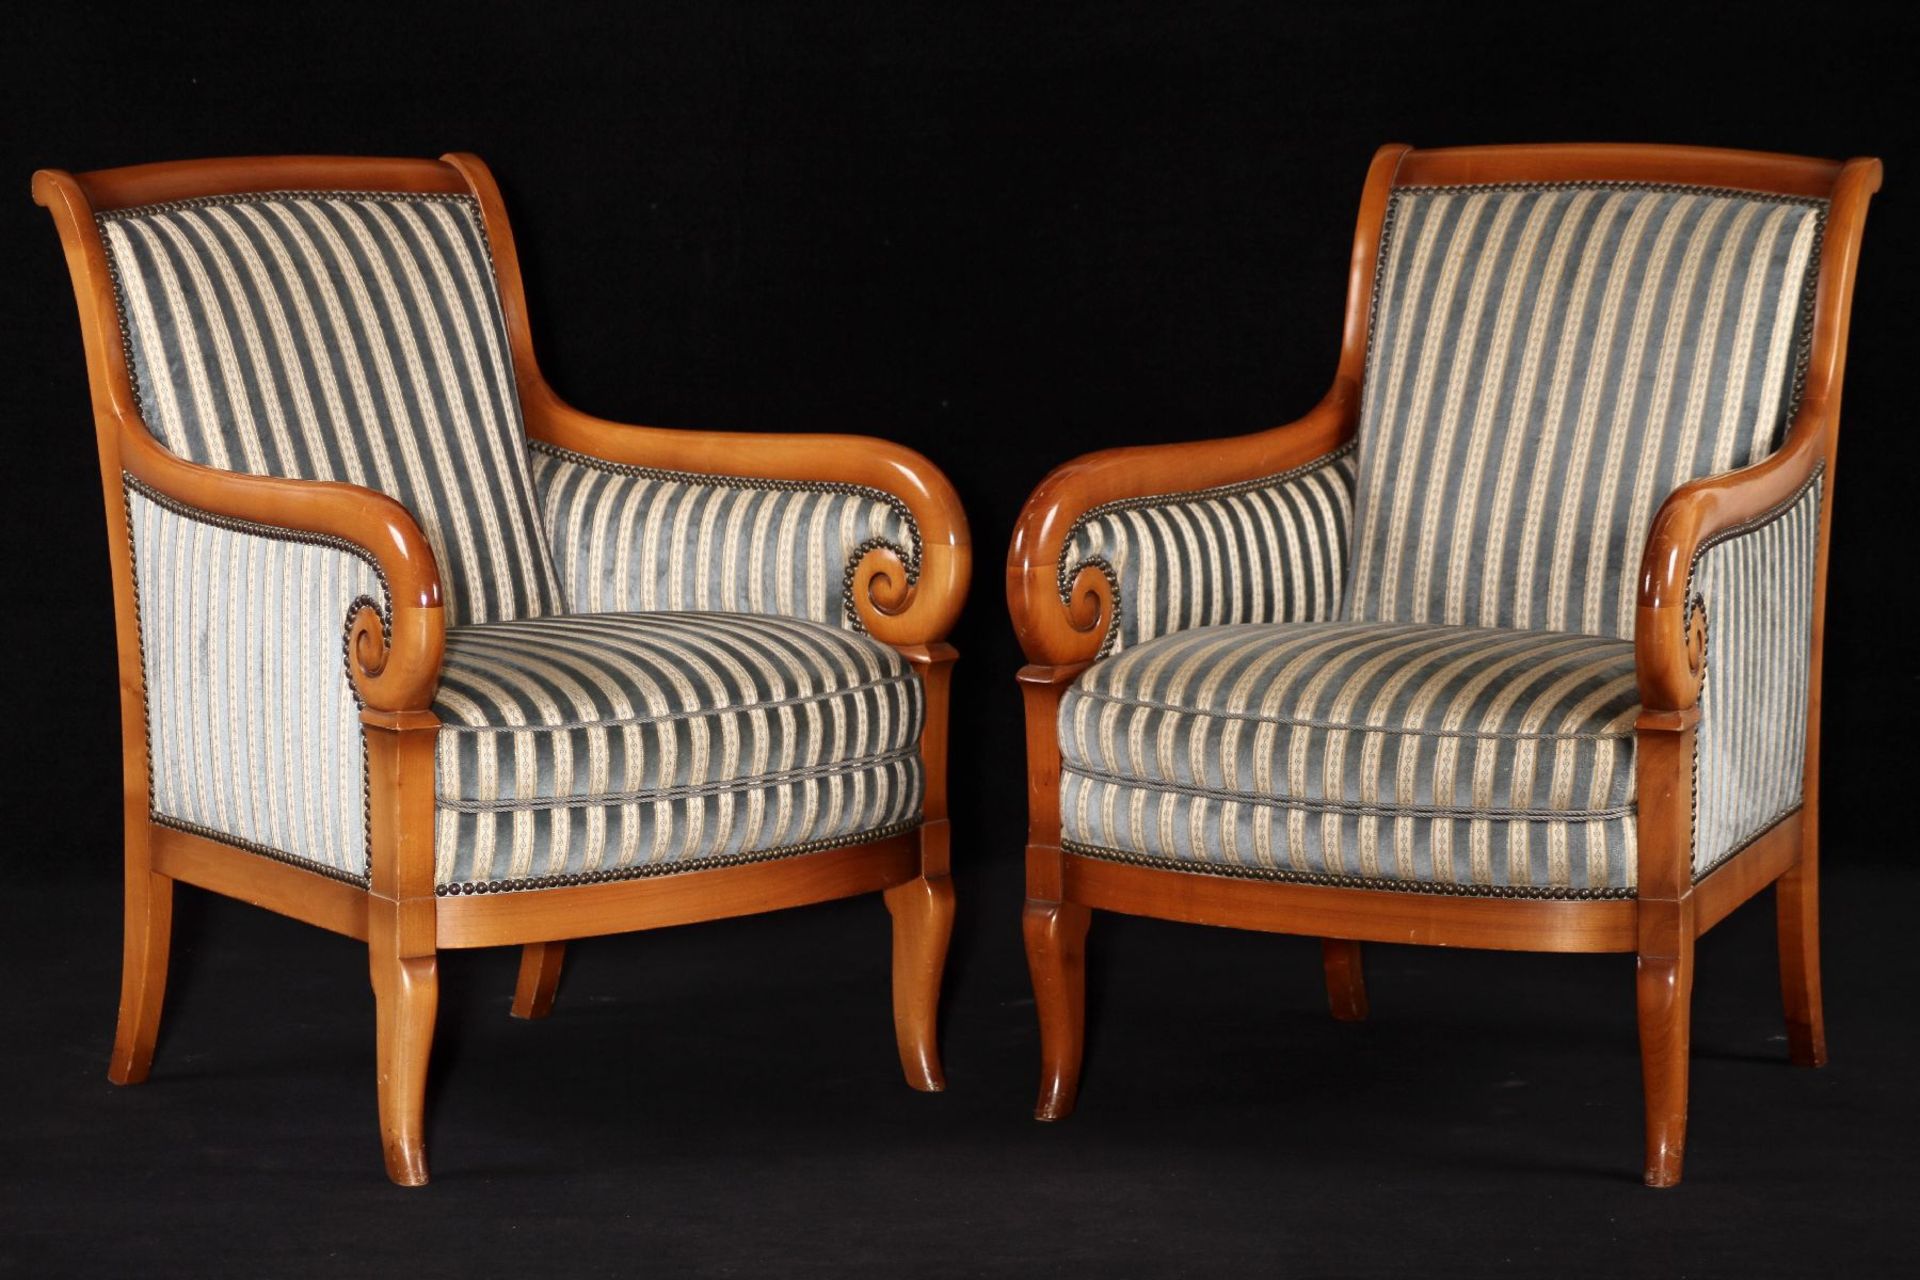 Pair of Armchairs, style of 1830, solid cherryframe, elegantly curved front, handrails ending in